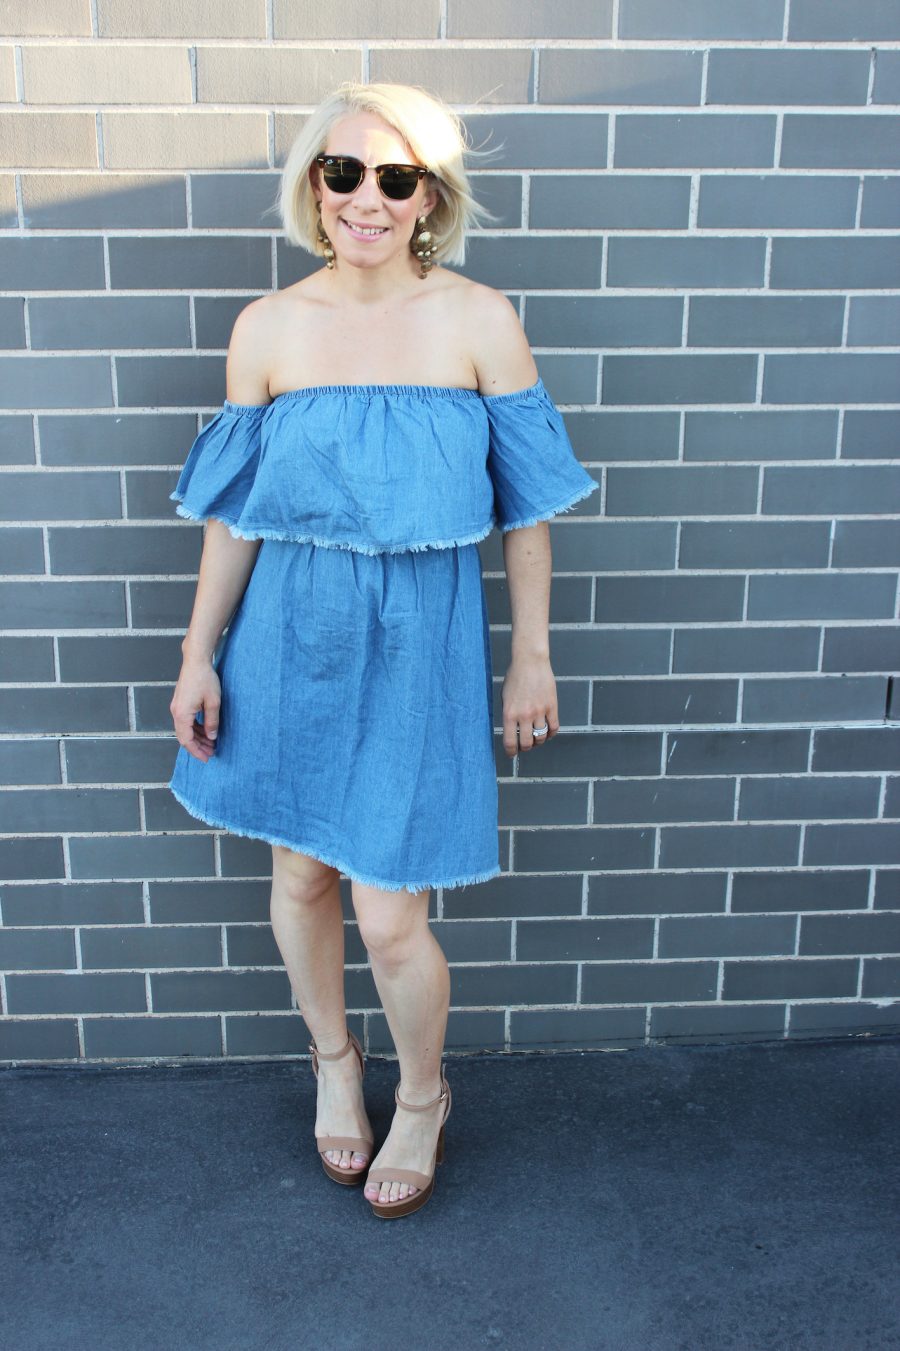 See Need Want Update Your Style Denim Dress